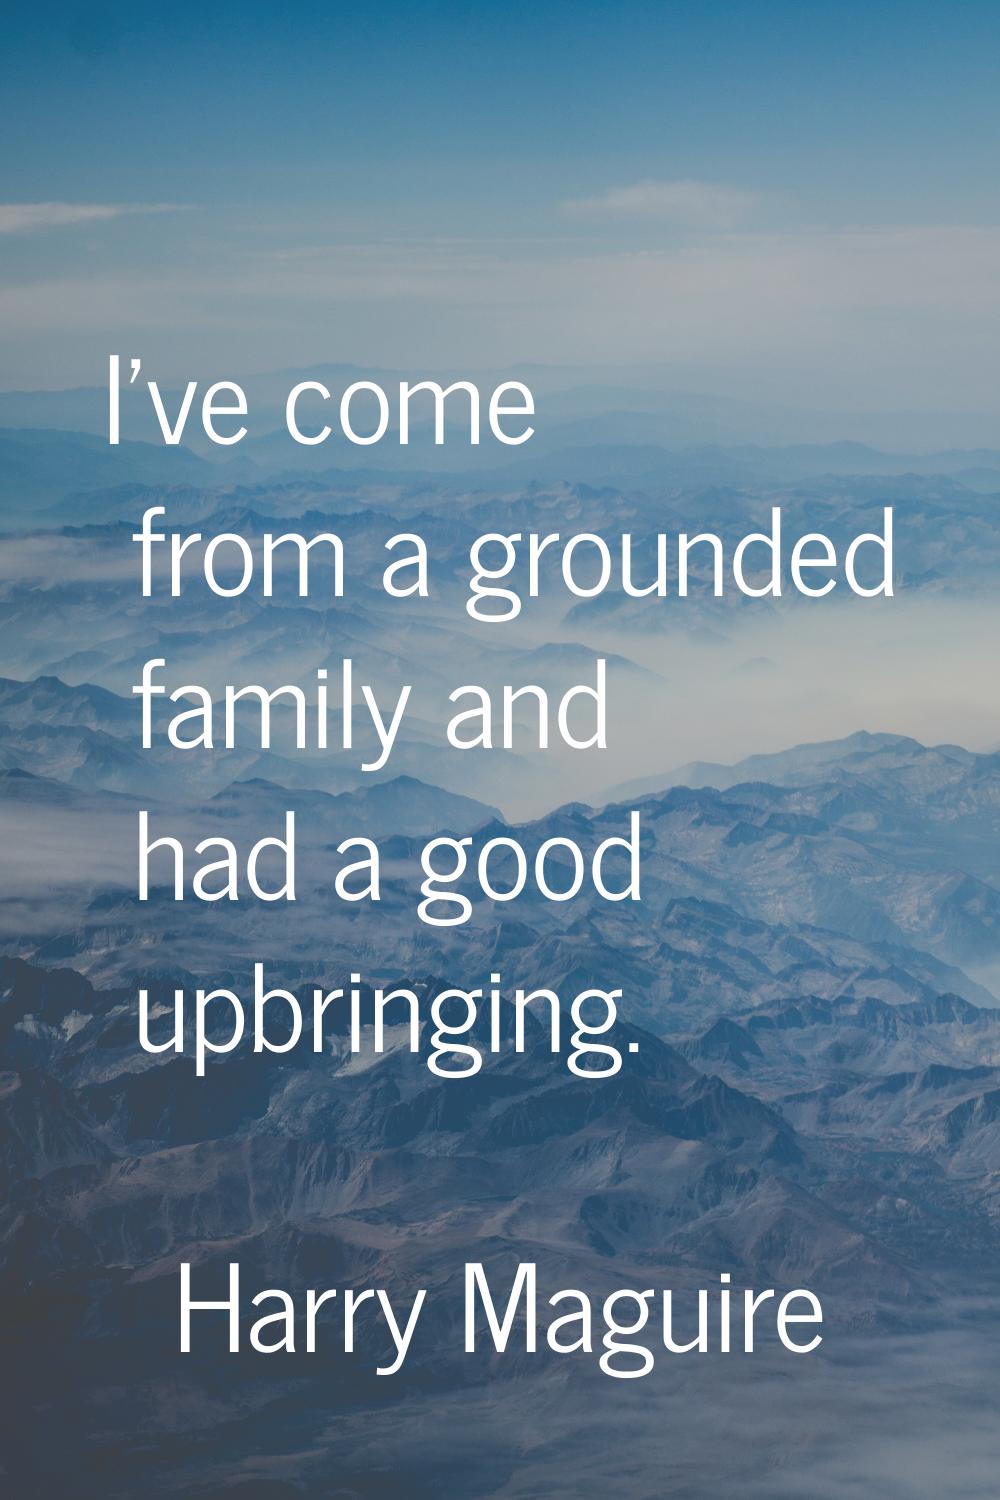 I've come from a grounded family and had a good upbringing.